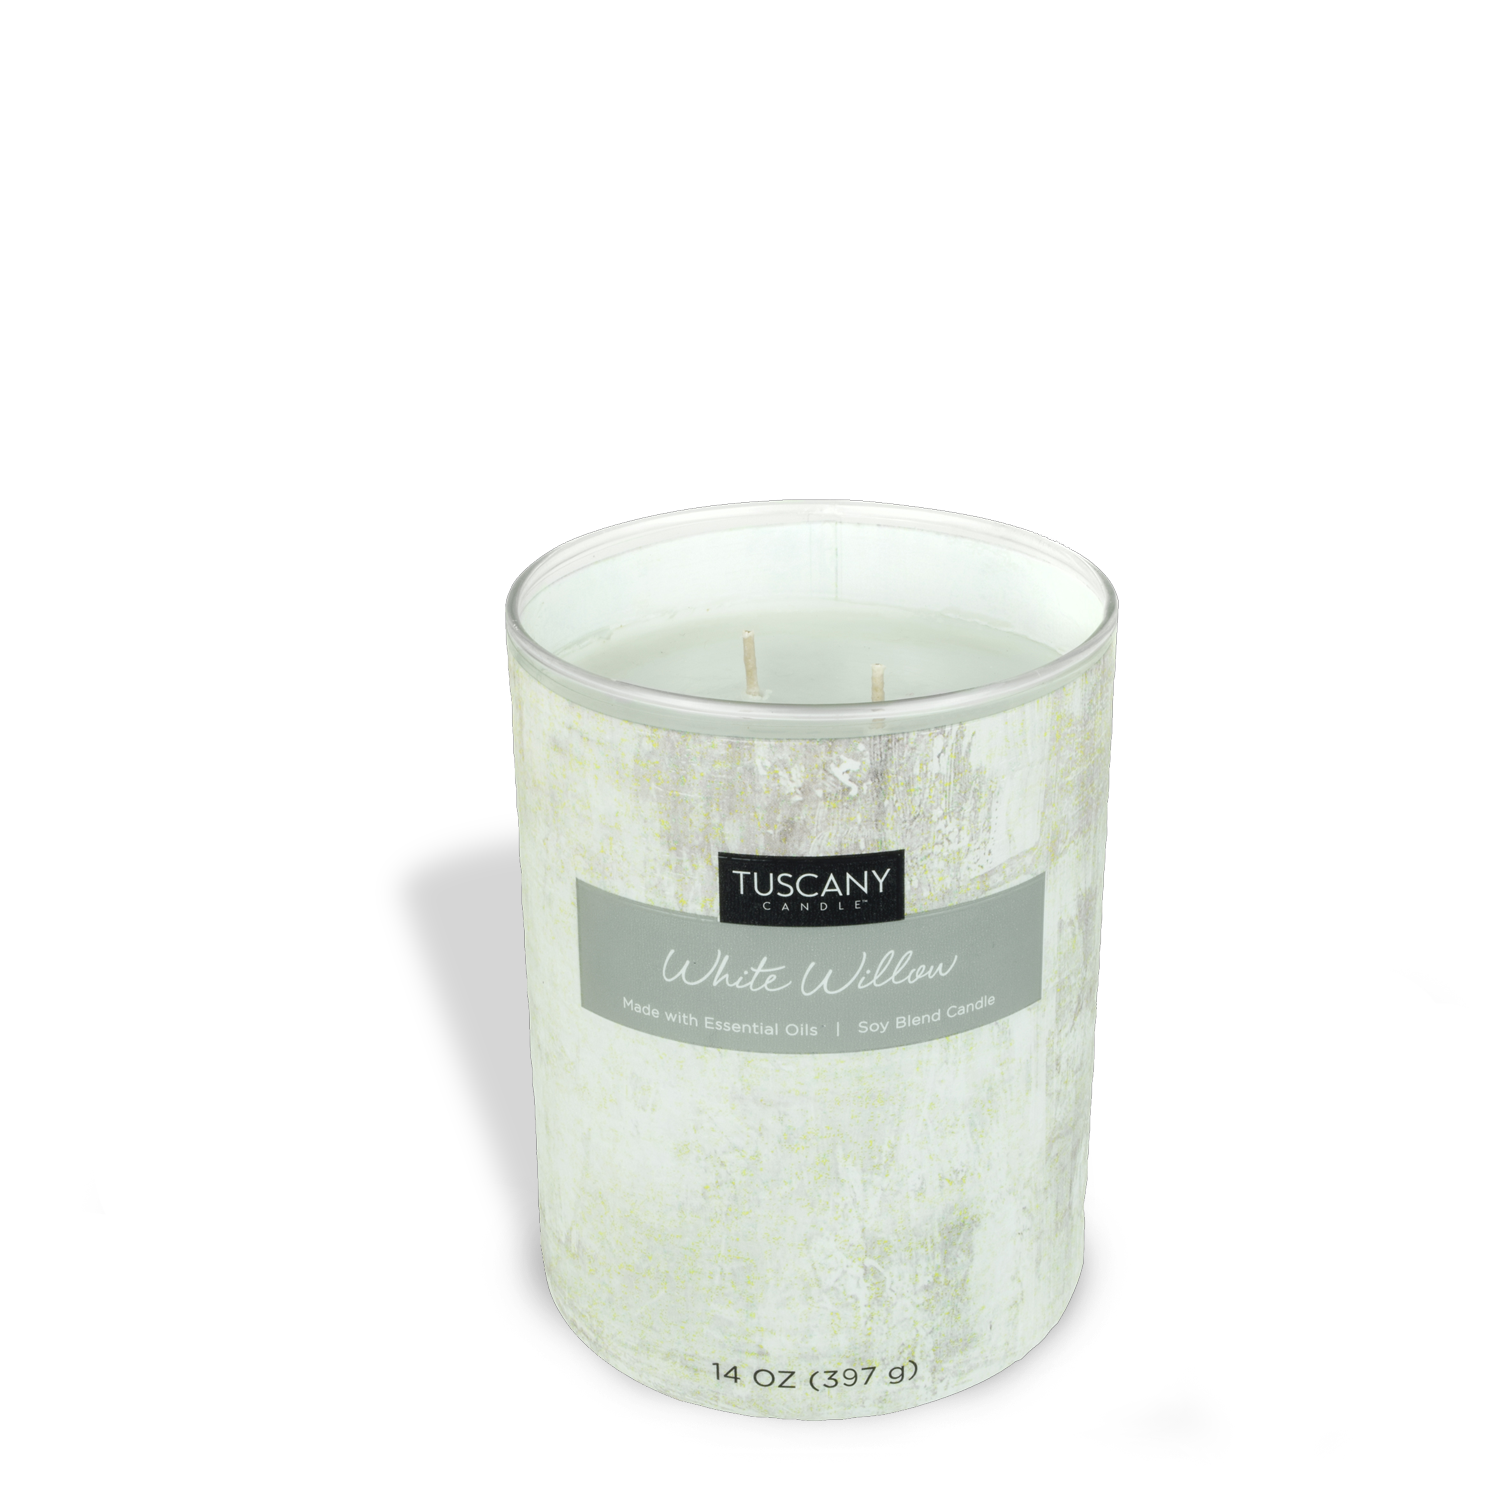 A White Willow Scented Jar Candle (14 oz) from Tuscany Candle, on a clean white background, adding a touch of elegance to your home décor.